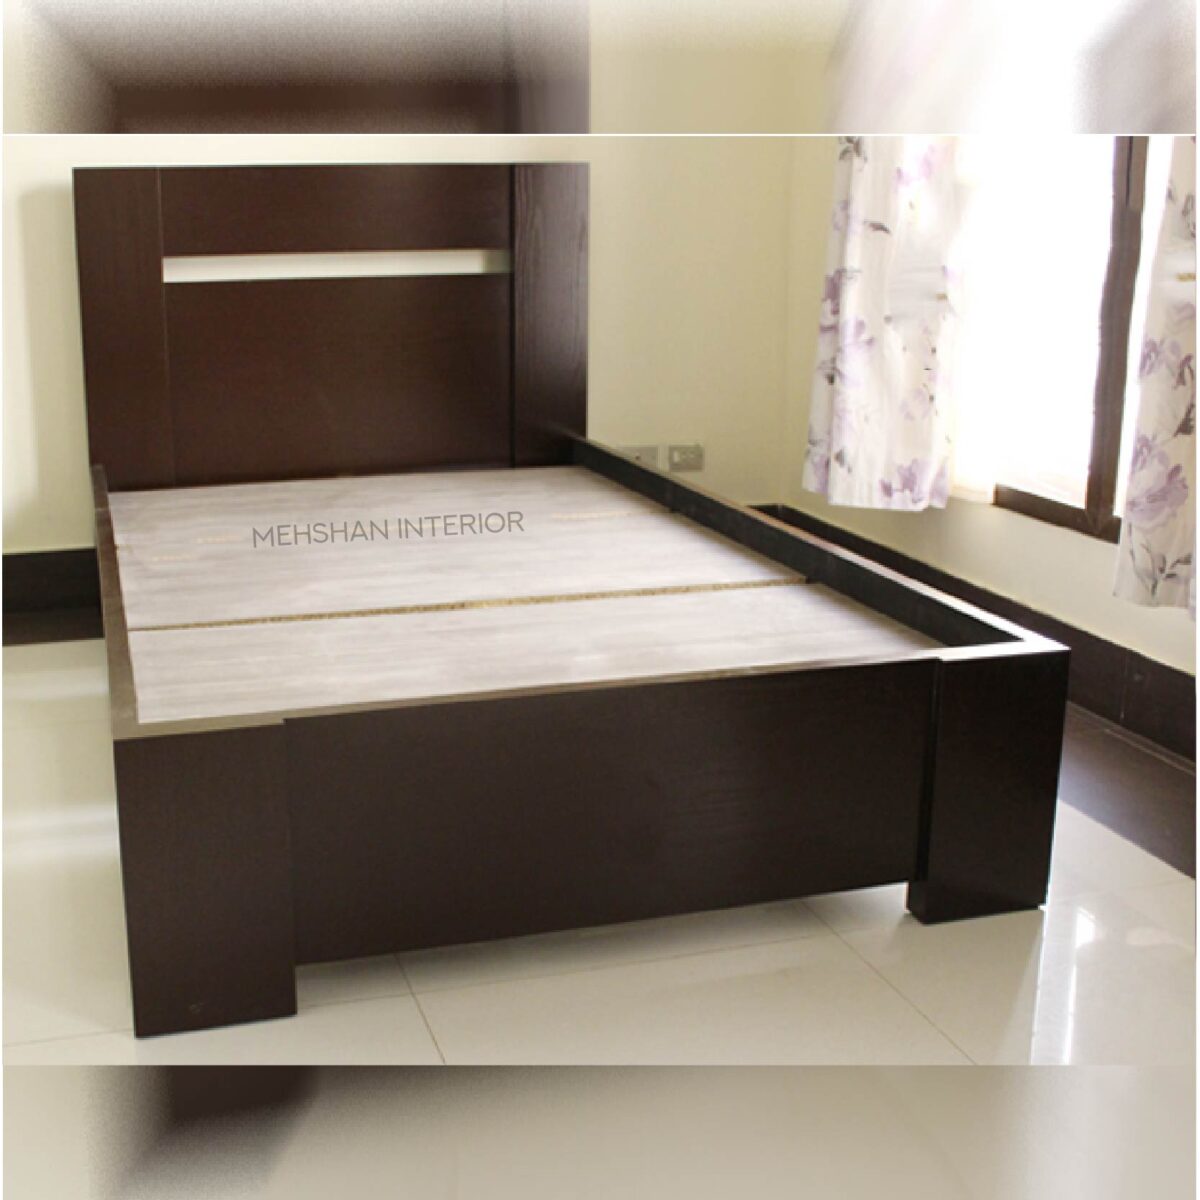 Latest single bed designs | single beds for sale in Karachi